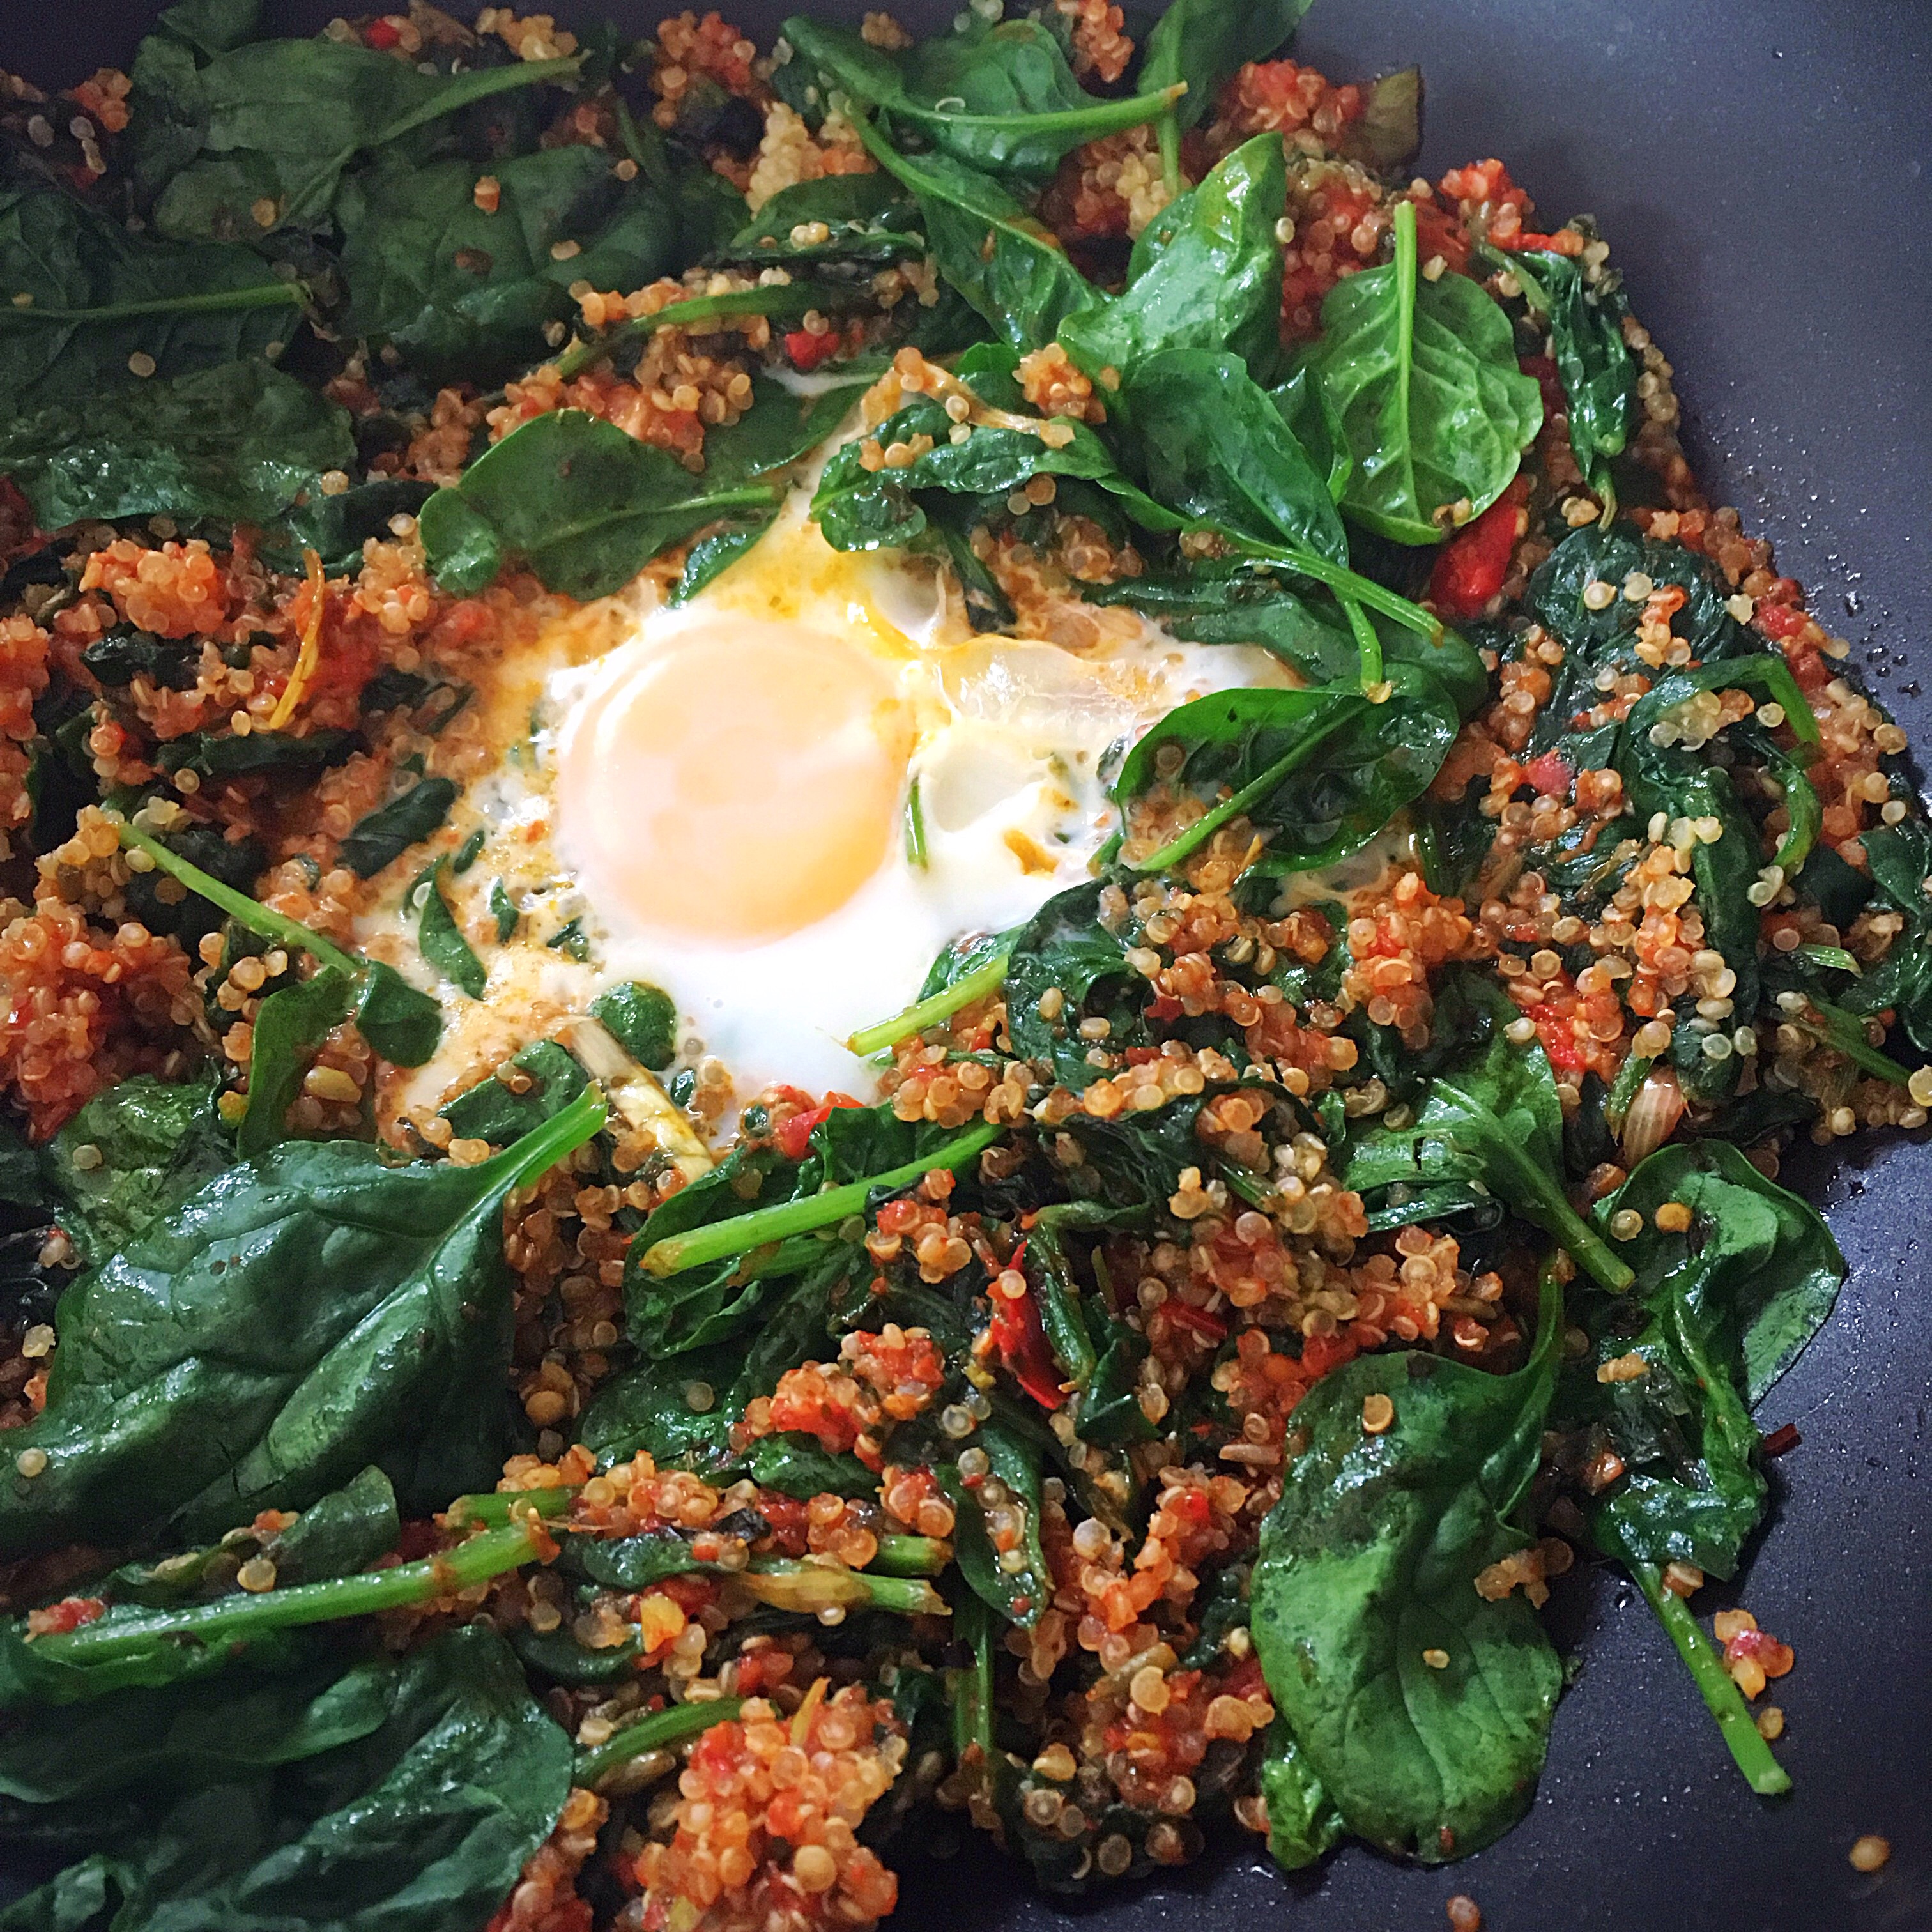 A bowl of food with spinach and an egg on top.